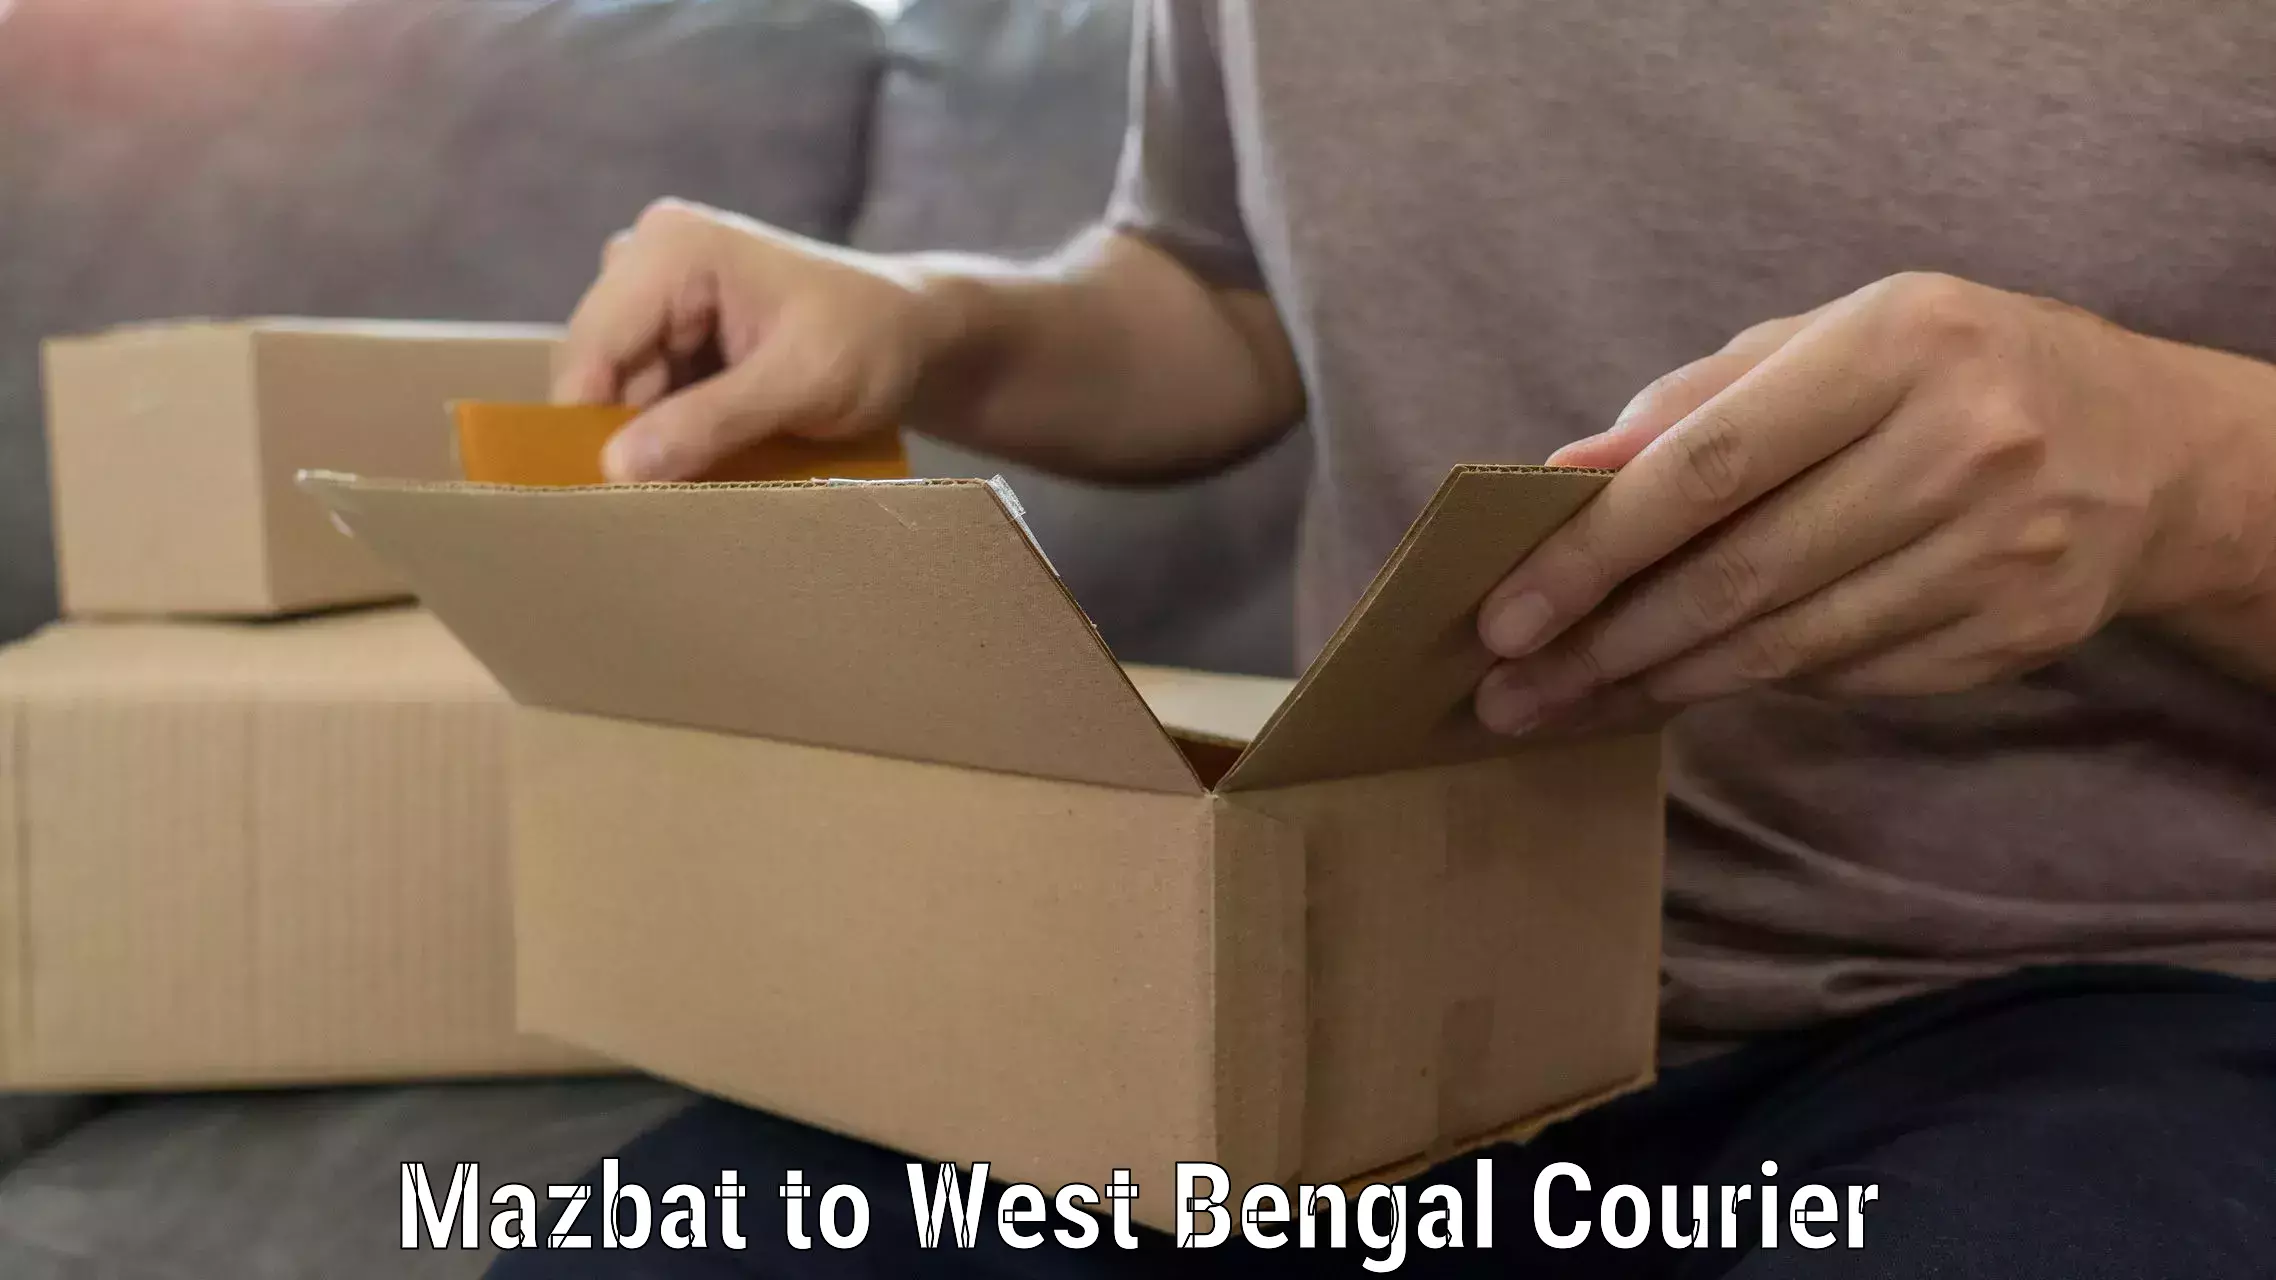 Moving and packing experts Mazbat to West Bengal